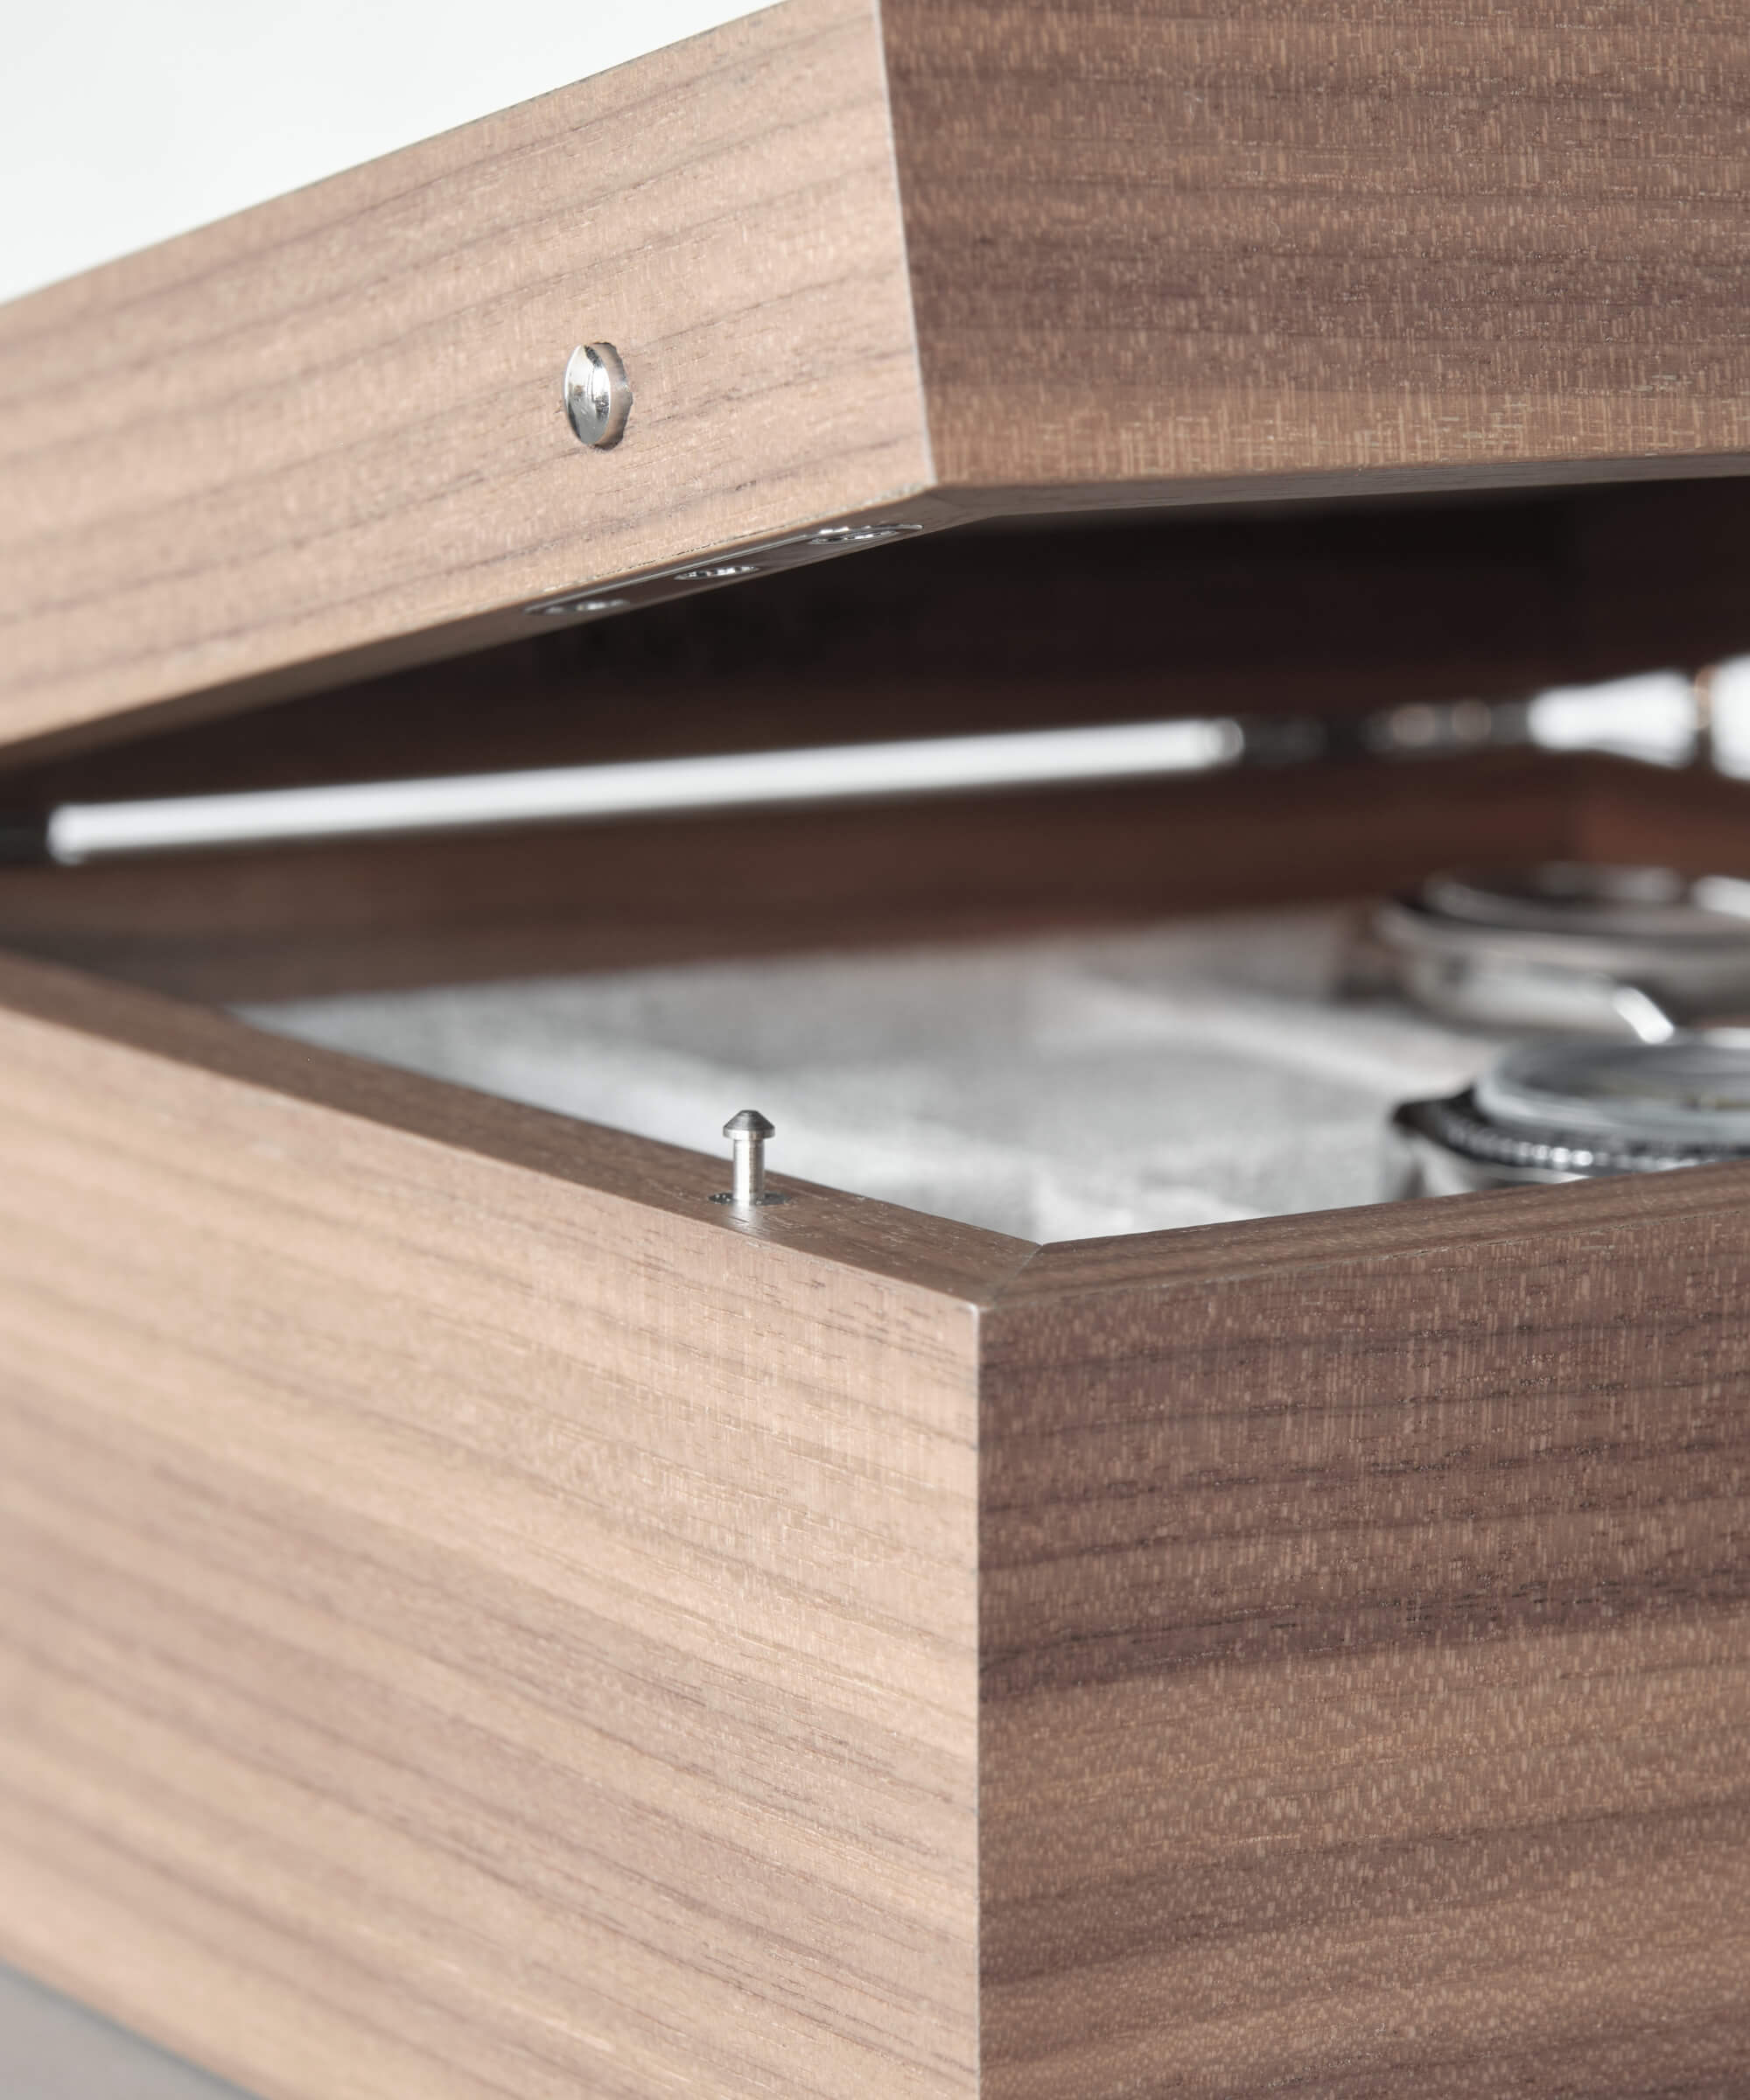 The TAWBURY Grove 6 Slot Watch Box with Solid Lid - Walnut is an elegantly crafted wooden box perfect for watch collections. This exquisite timepiece storage solution will keep your prized watches safe and secure while adding a touch of sophistication.